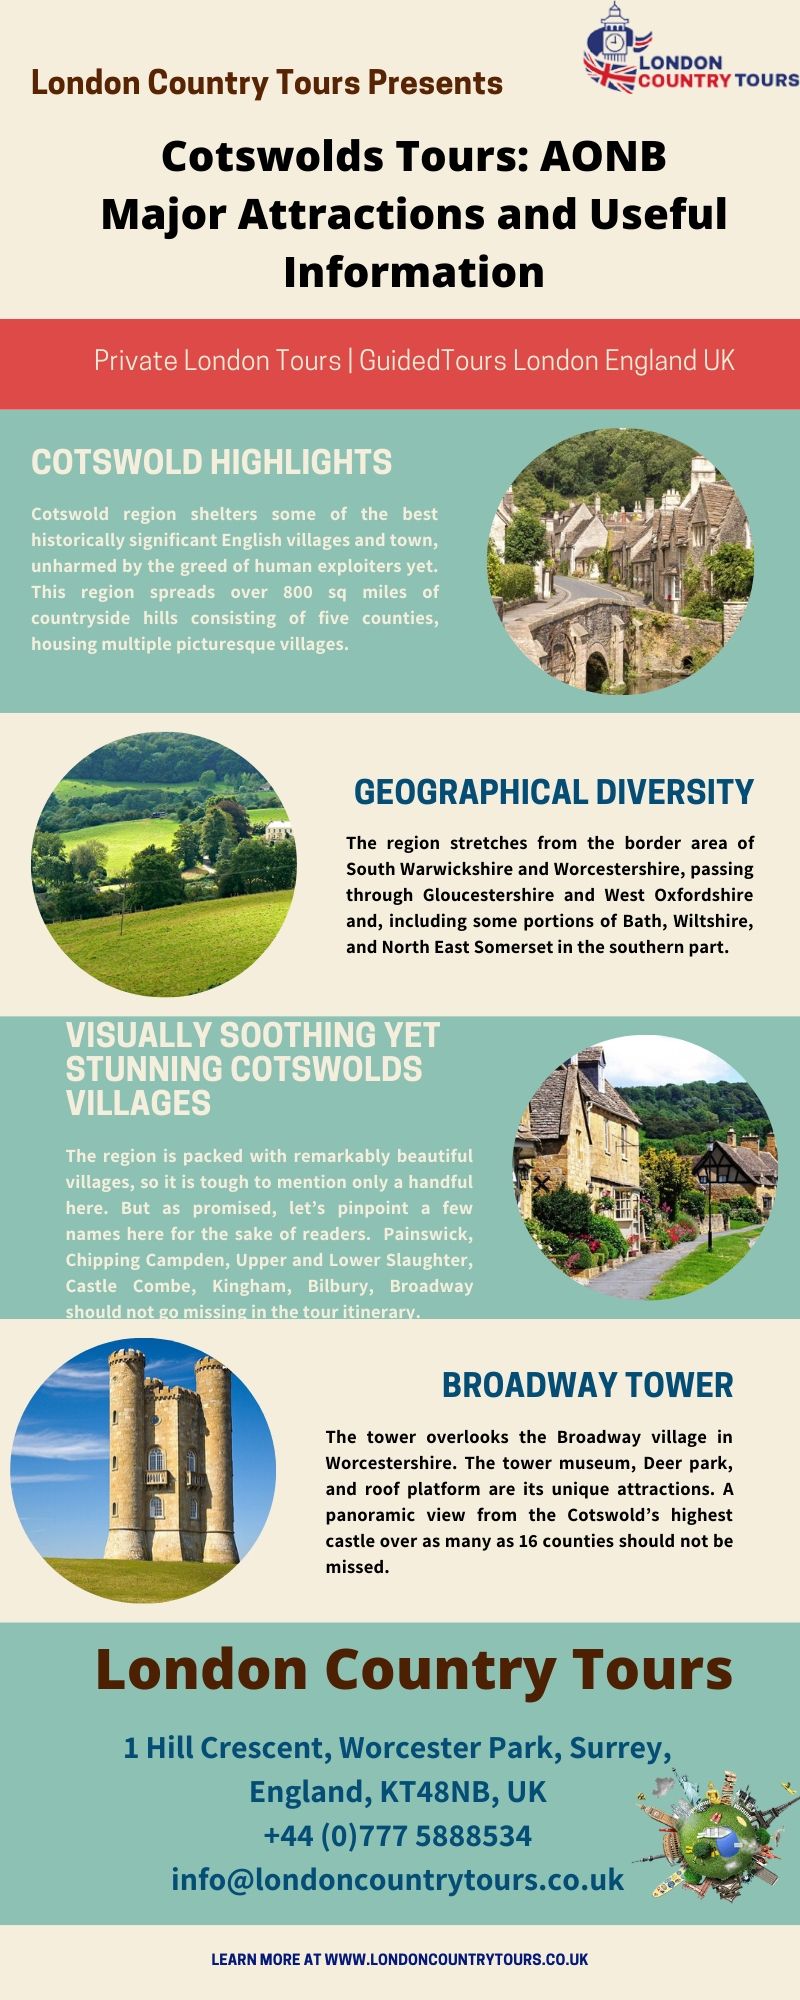 Cotswolds Tours_ AONB Major Attractions and Useful Information.jpg  by LondonCountryTours